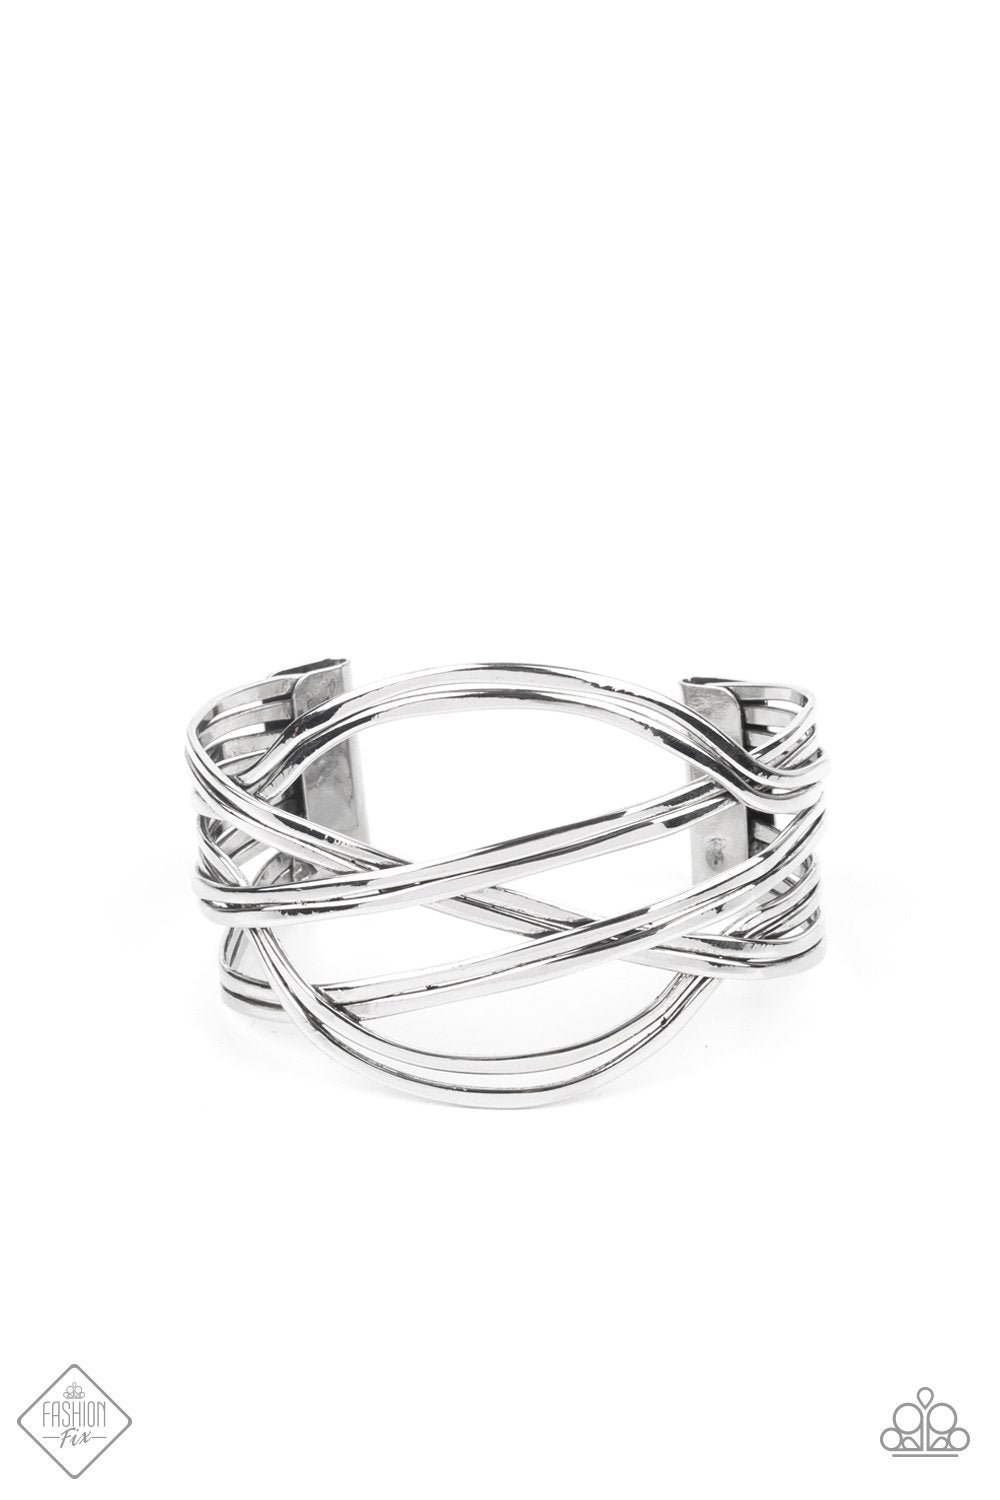 Paparazzi&nbsp;Hautely Hammered Silver Cuff Bracelet - Fashion Fix Magnificent Musings June 2021